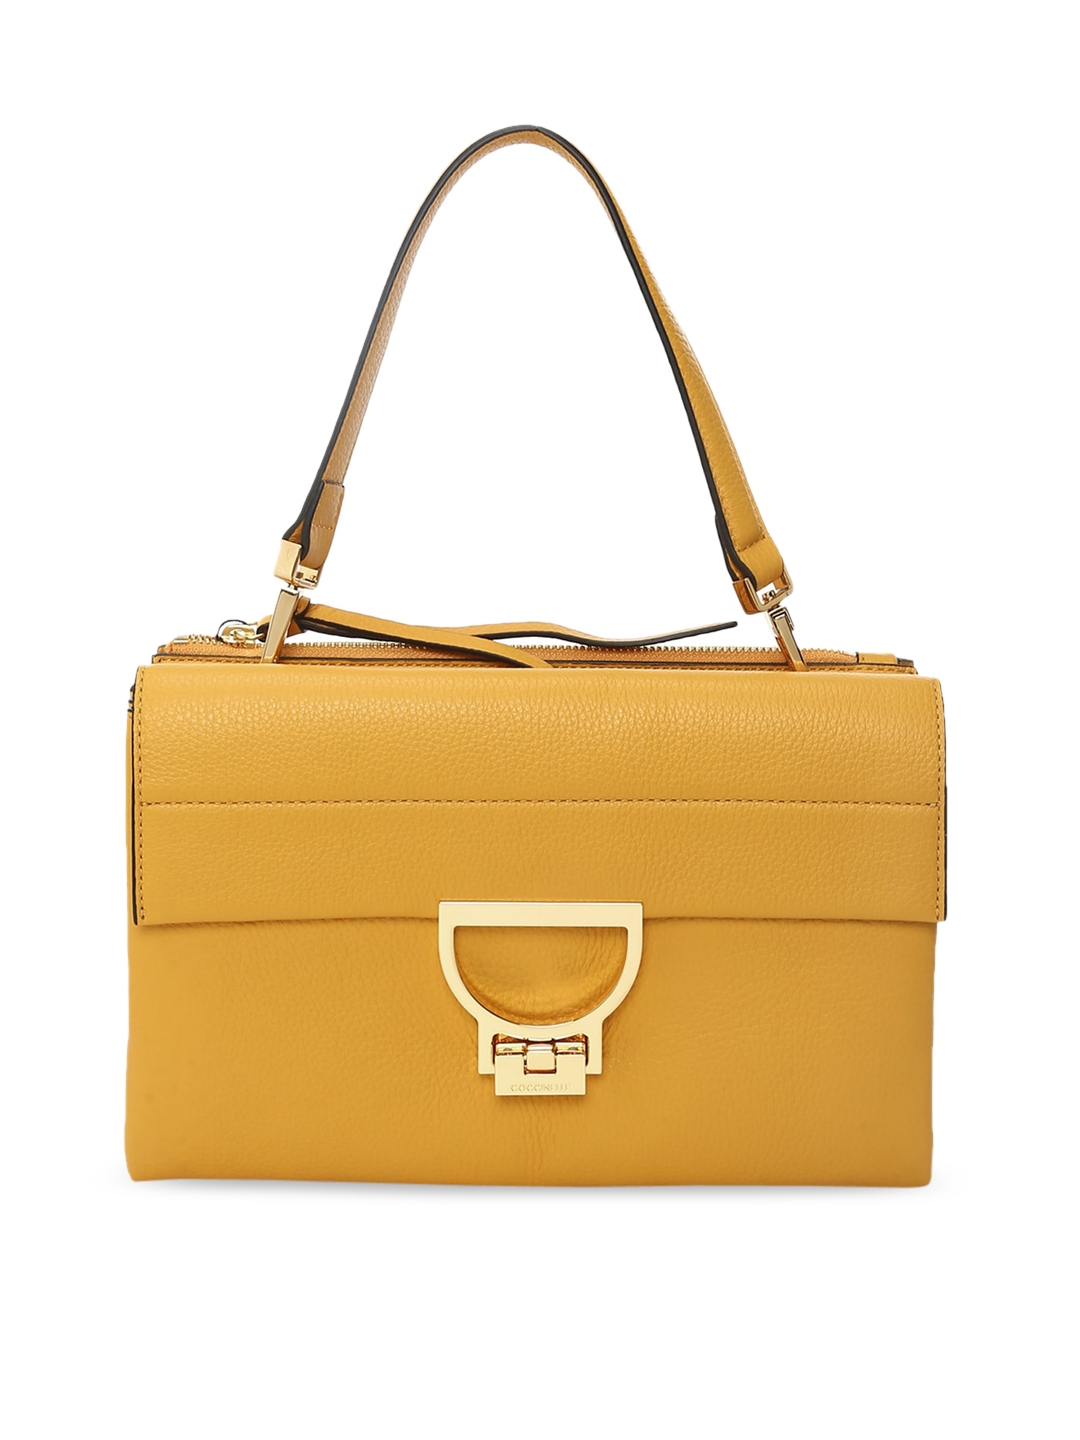 Coccinelle Yellow Leather Structured Satchel